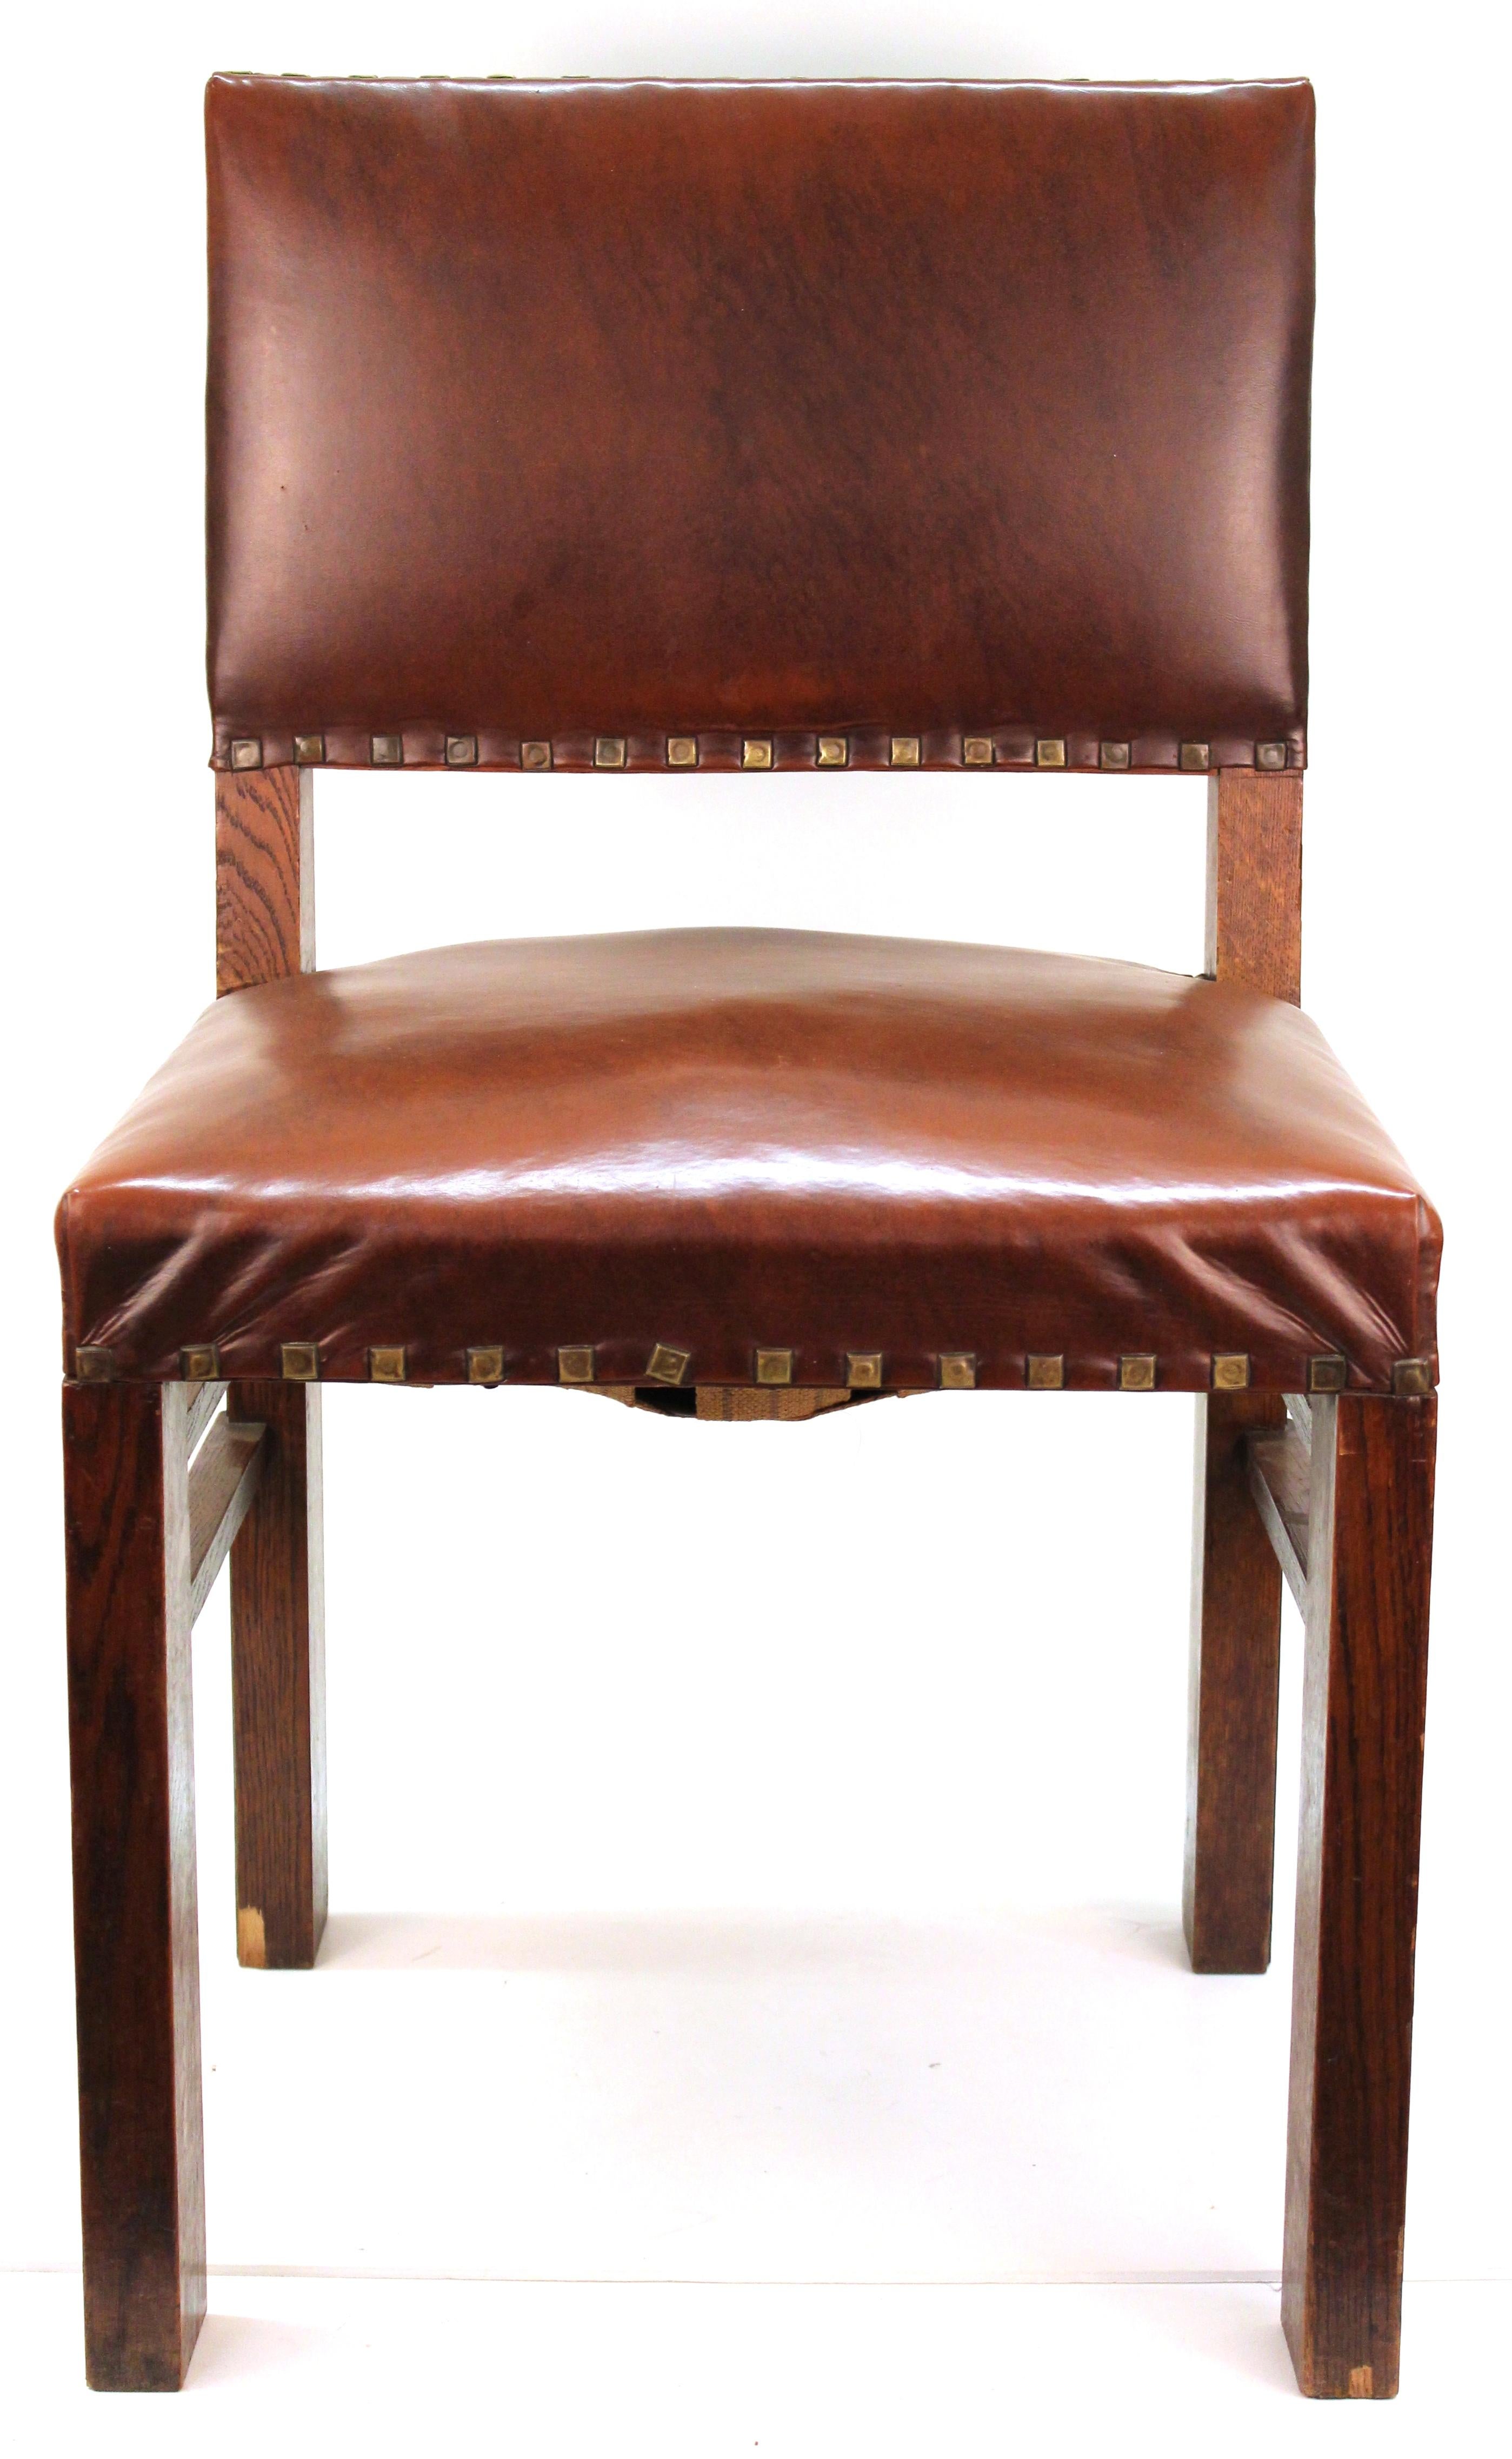 American Arts & Crafts Oak Chairs with Cognac Colored Leather Seats In Good Condition For Sale In New York, NY